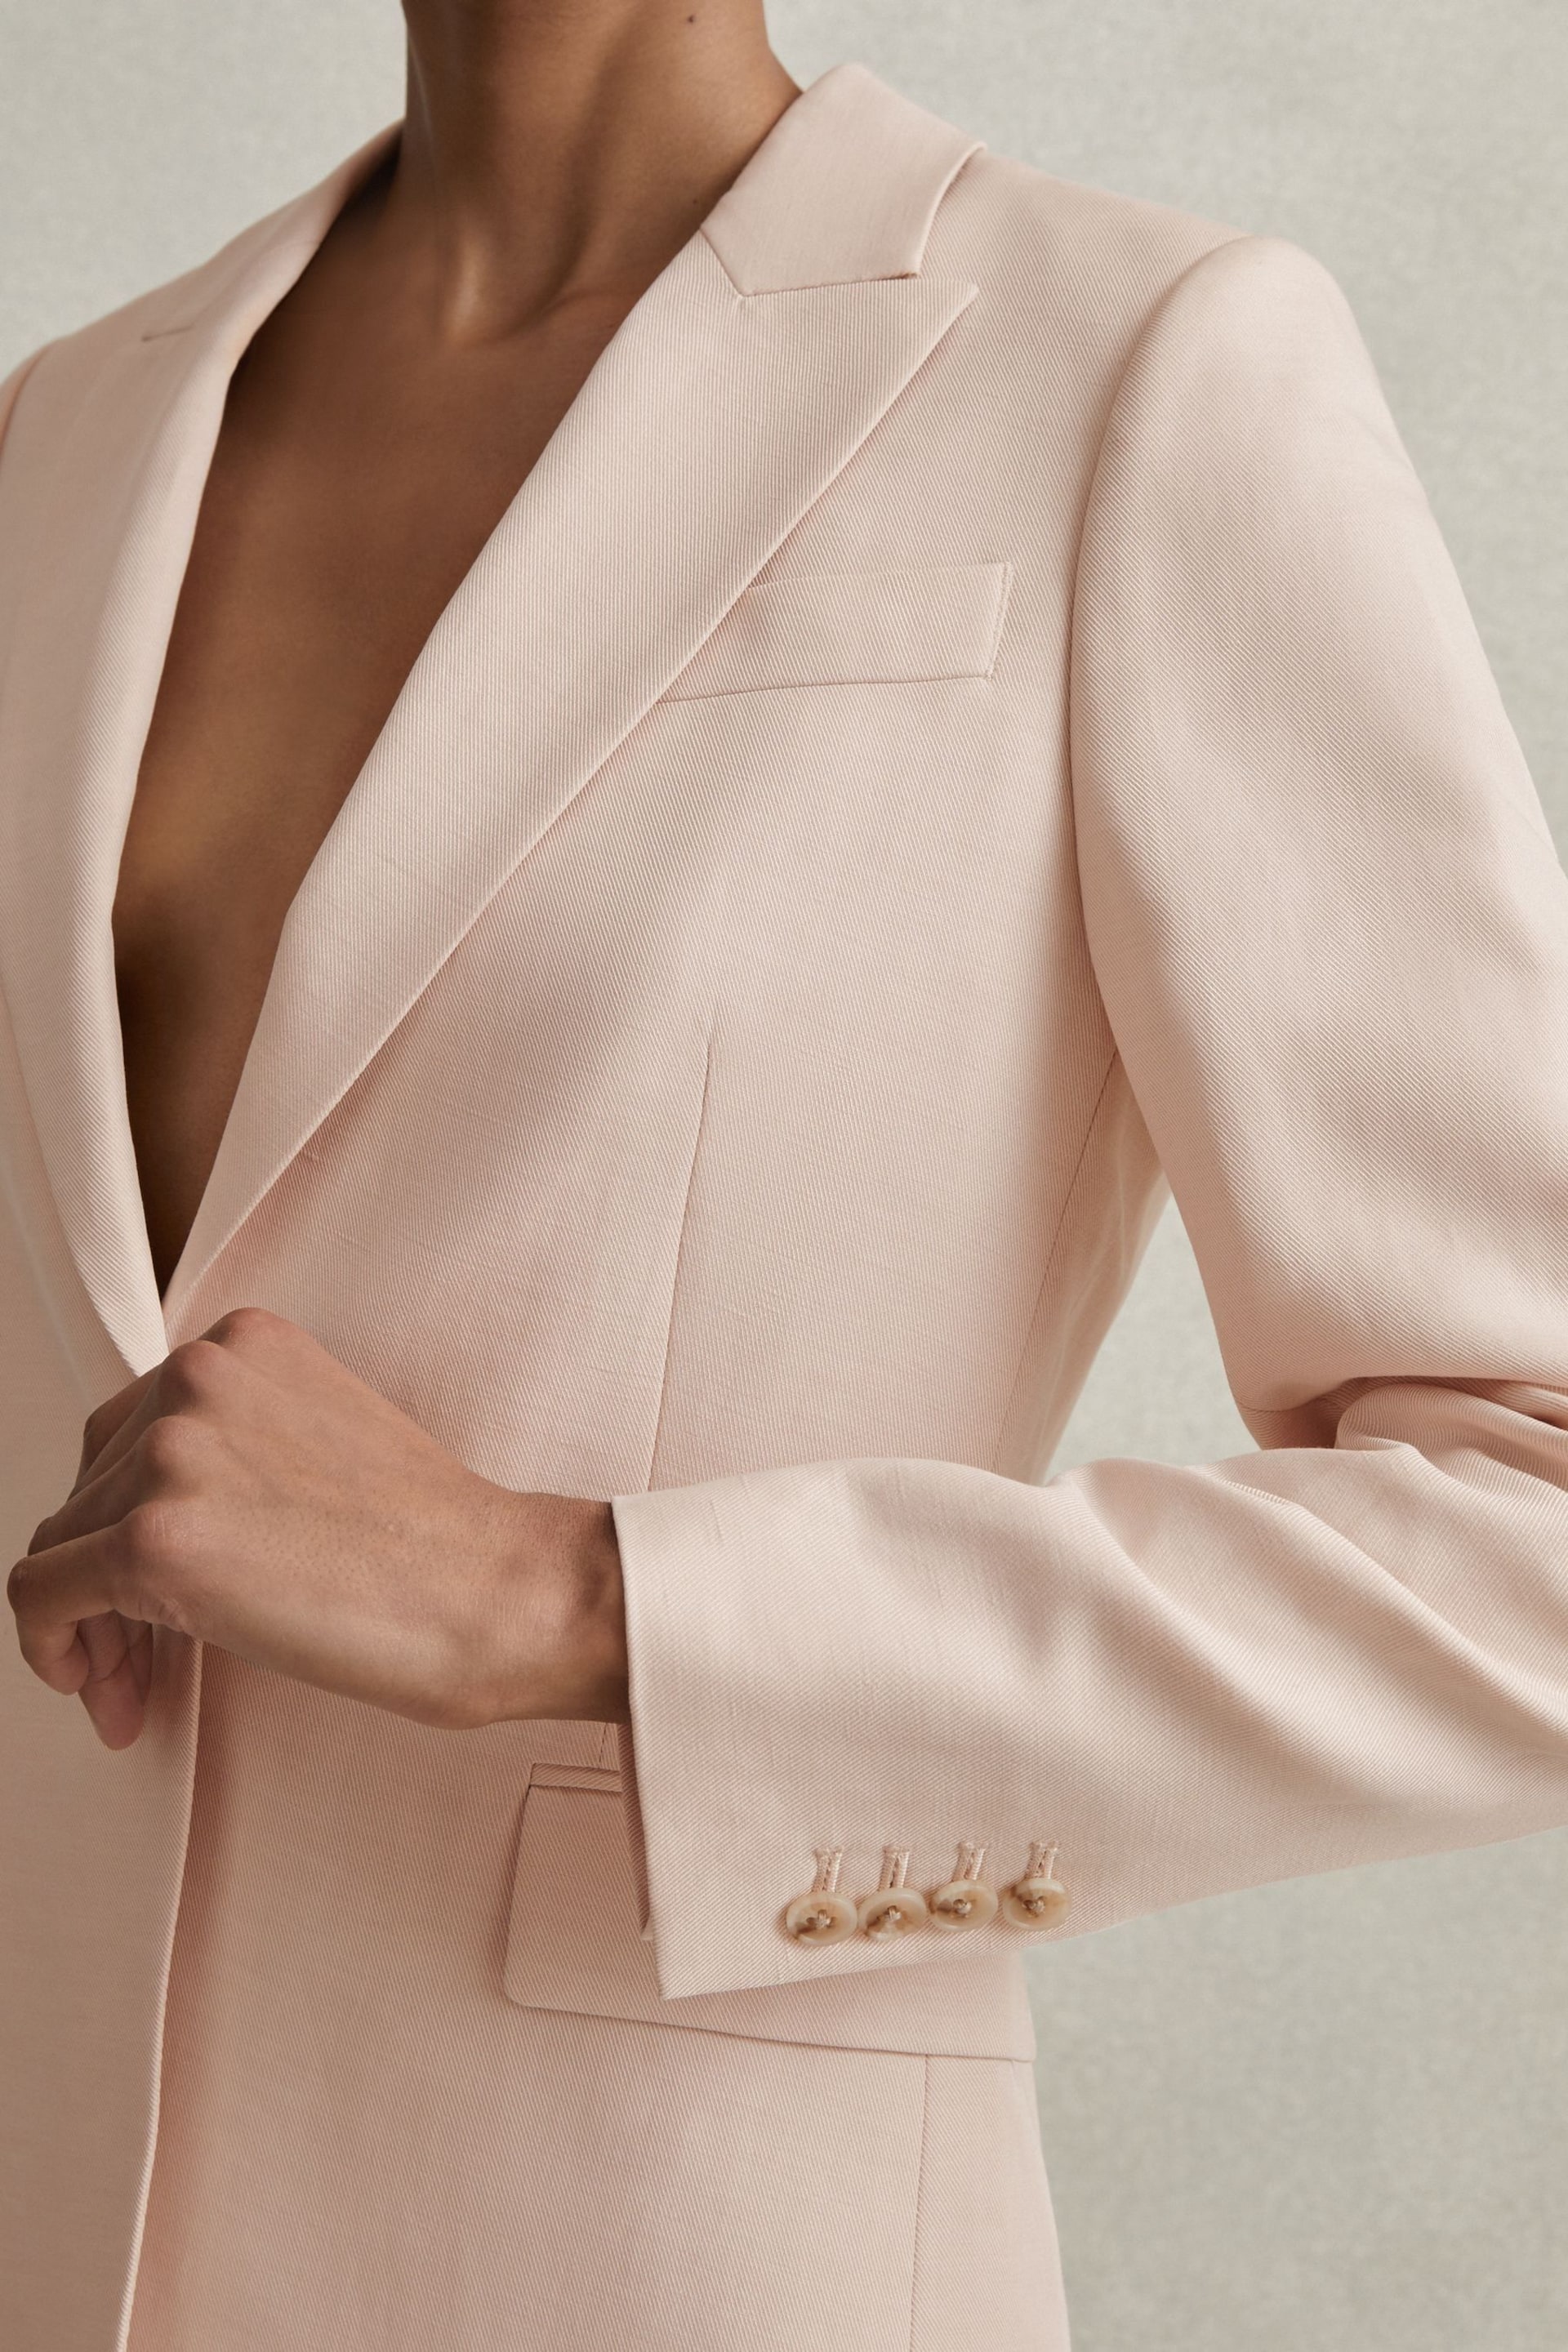 Reiss Pink Farrah Single Breasted Suit Blazer with TENCEL™ Fibers - Image 5 of 6